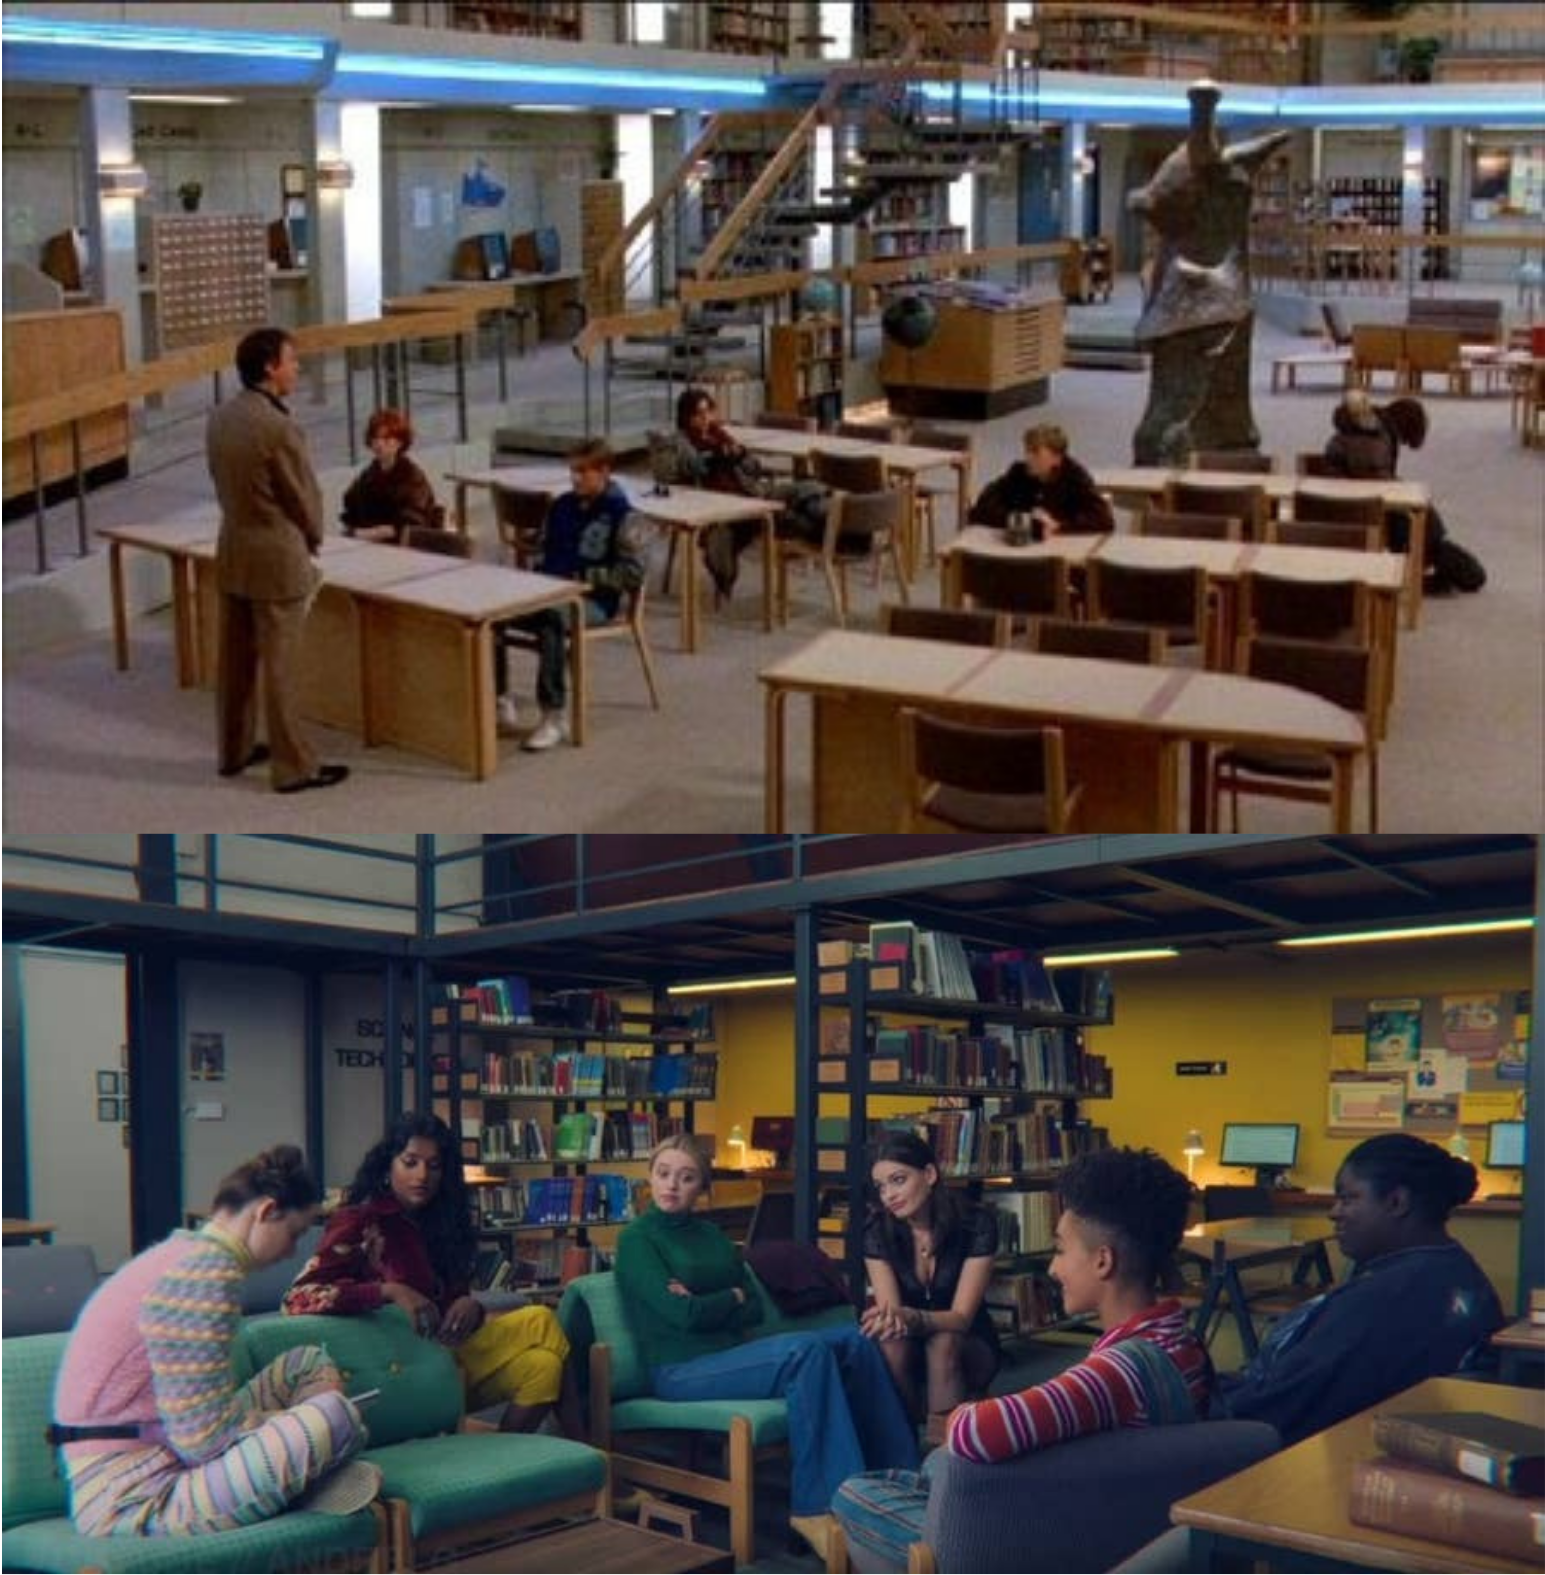 Upper panel: The cast of breakfast club in the library. Bottom Panel: The girls from Sex Education sitting in the library.